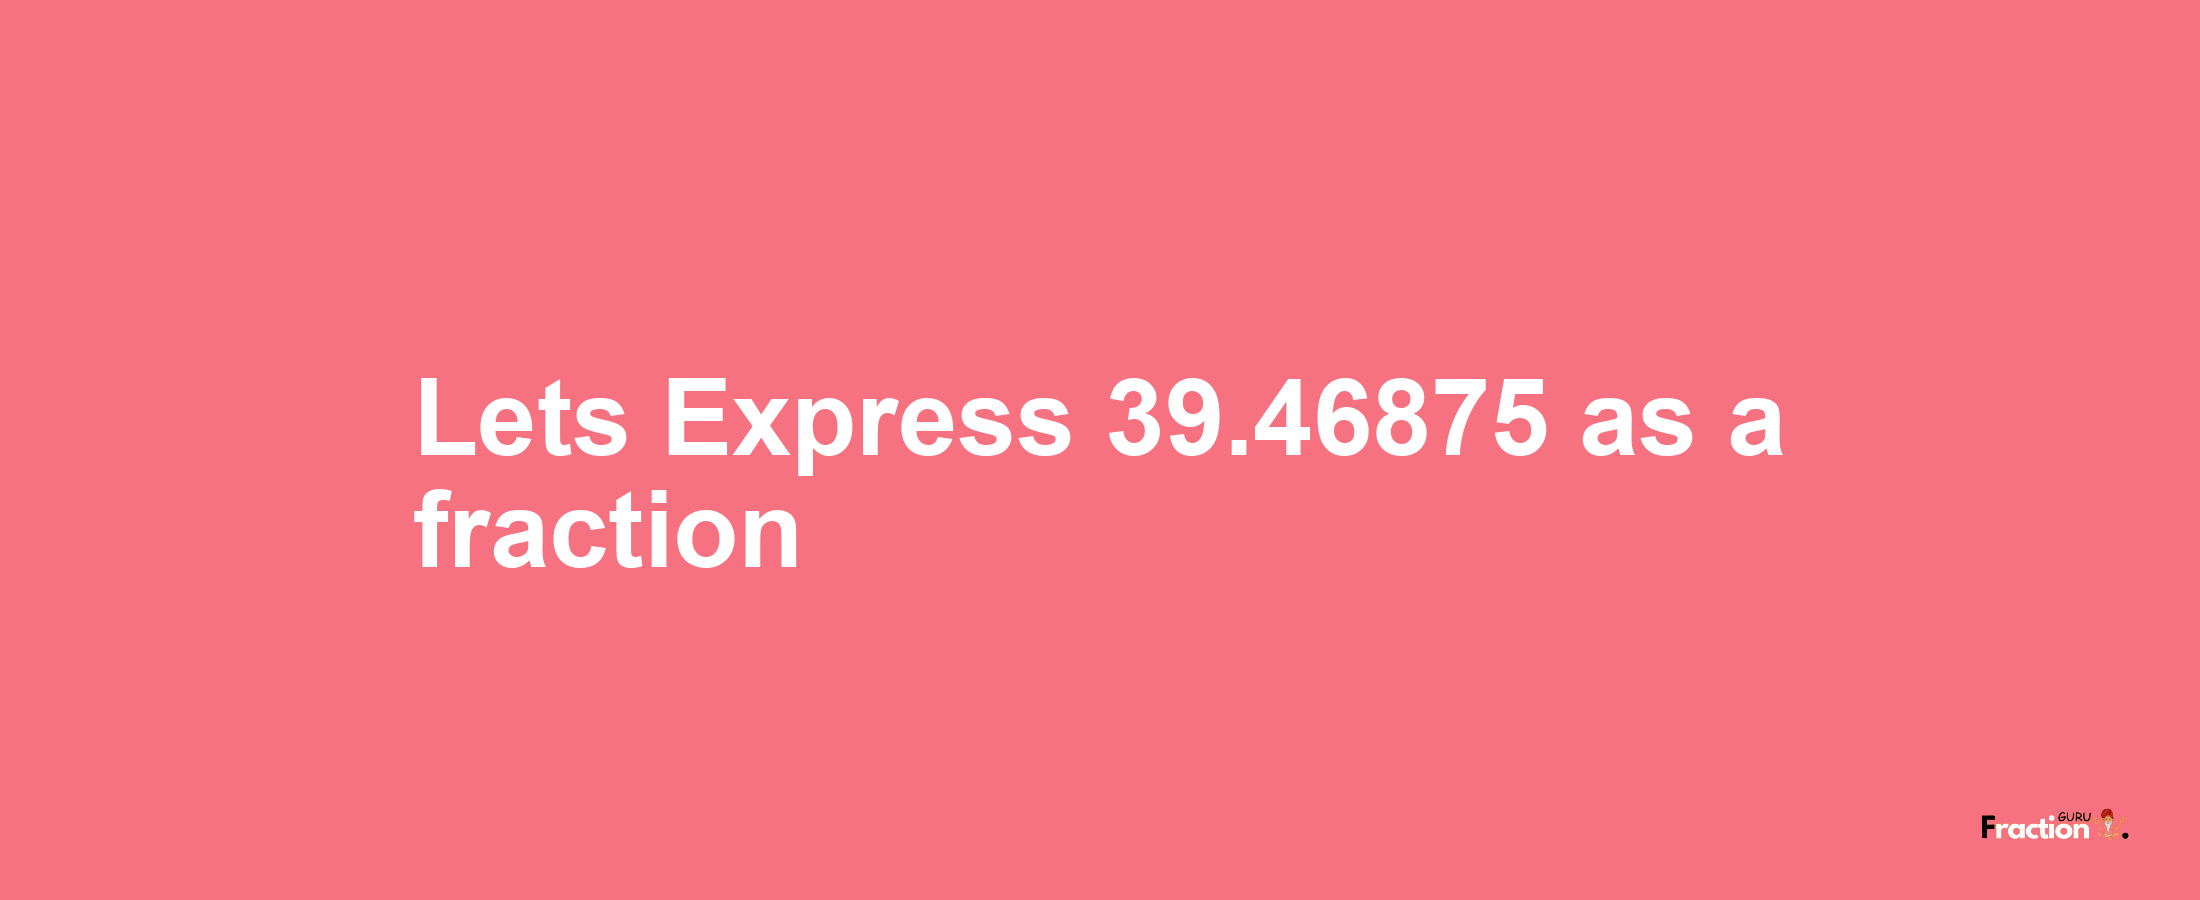 Lets Express 39.46875 as afraction